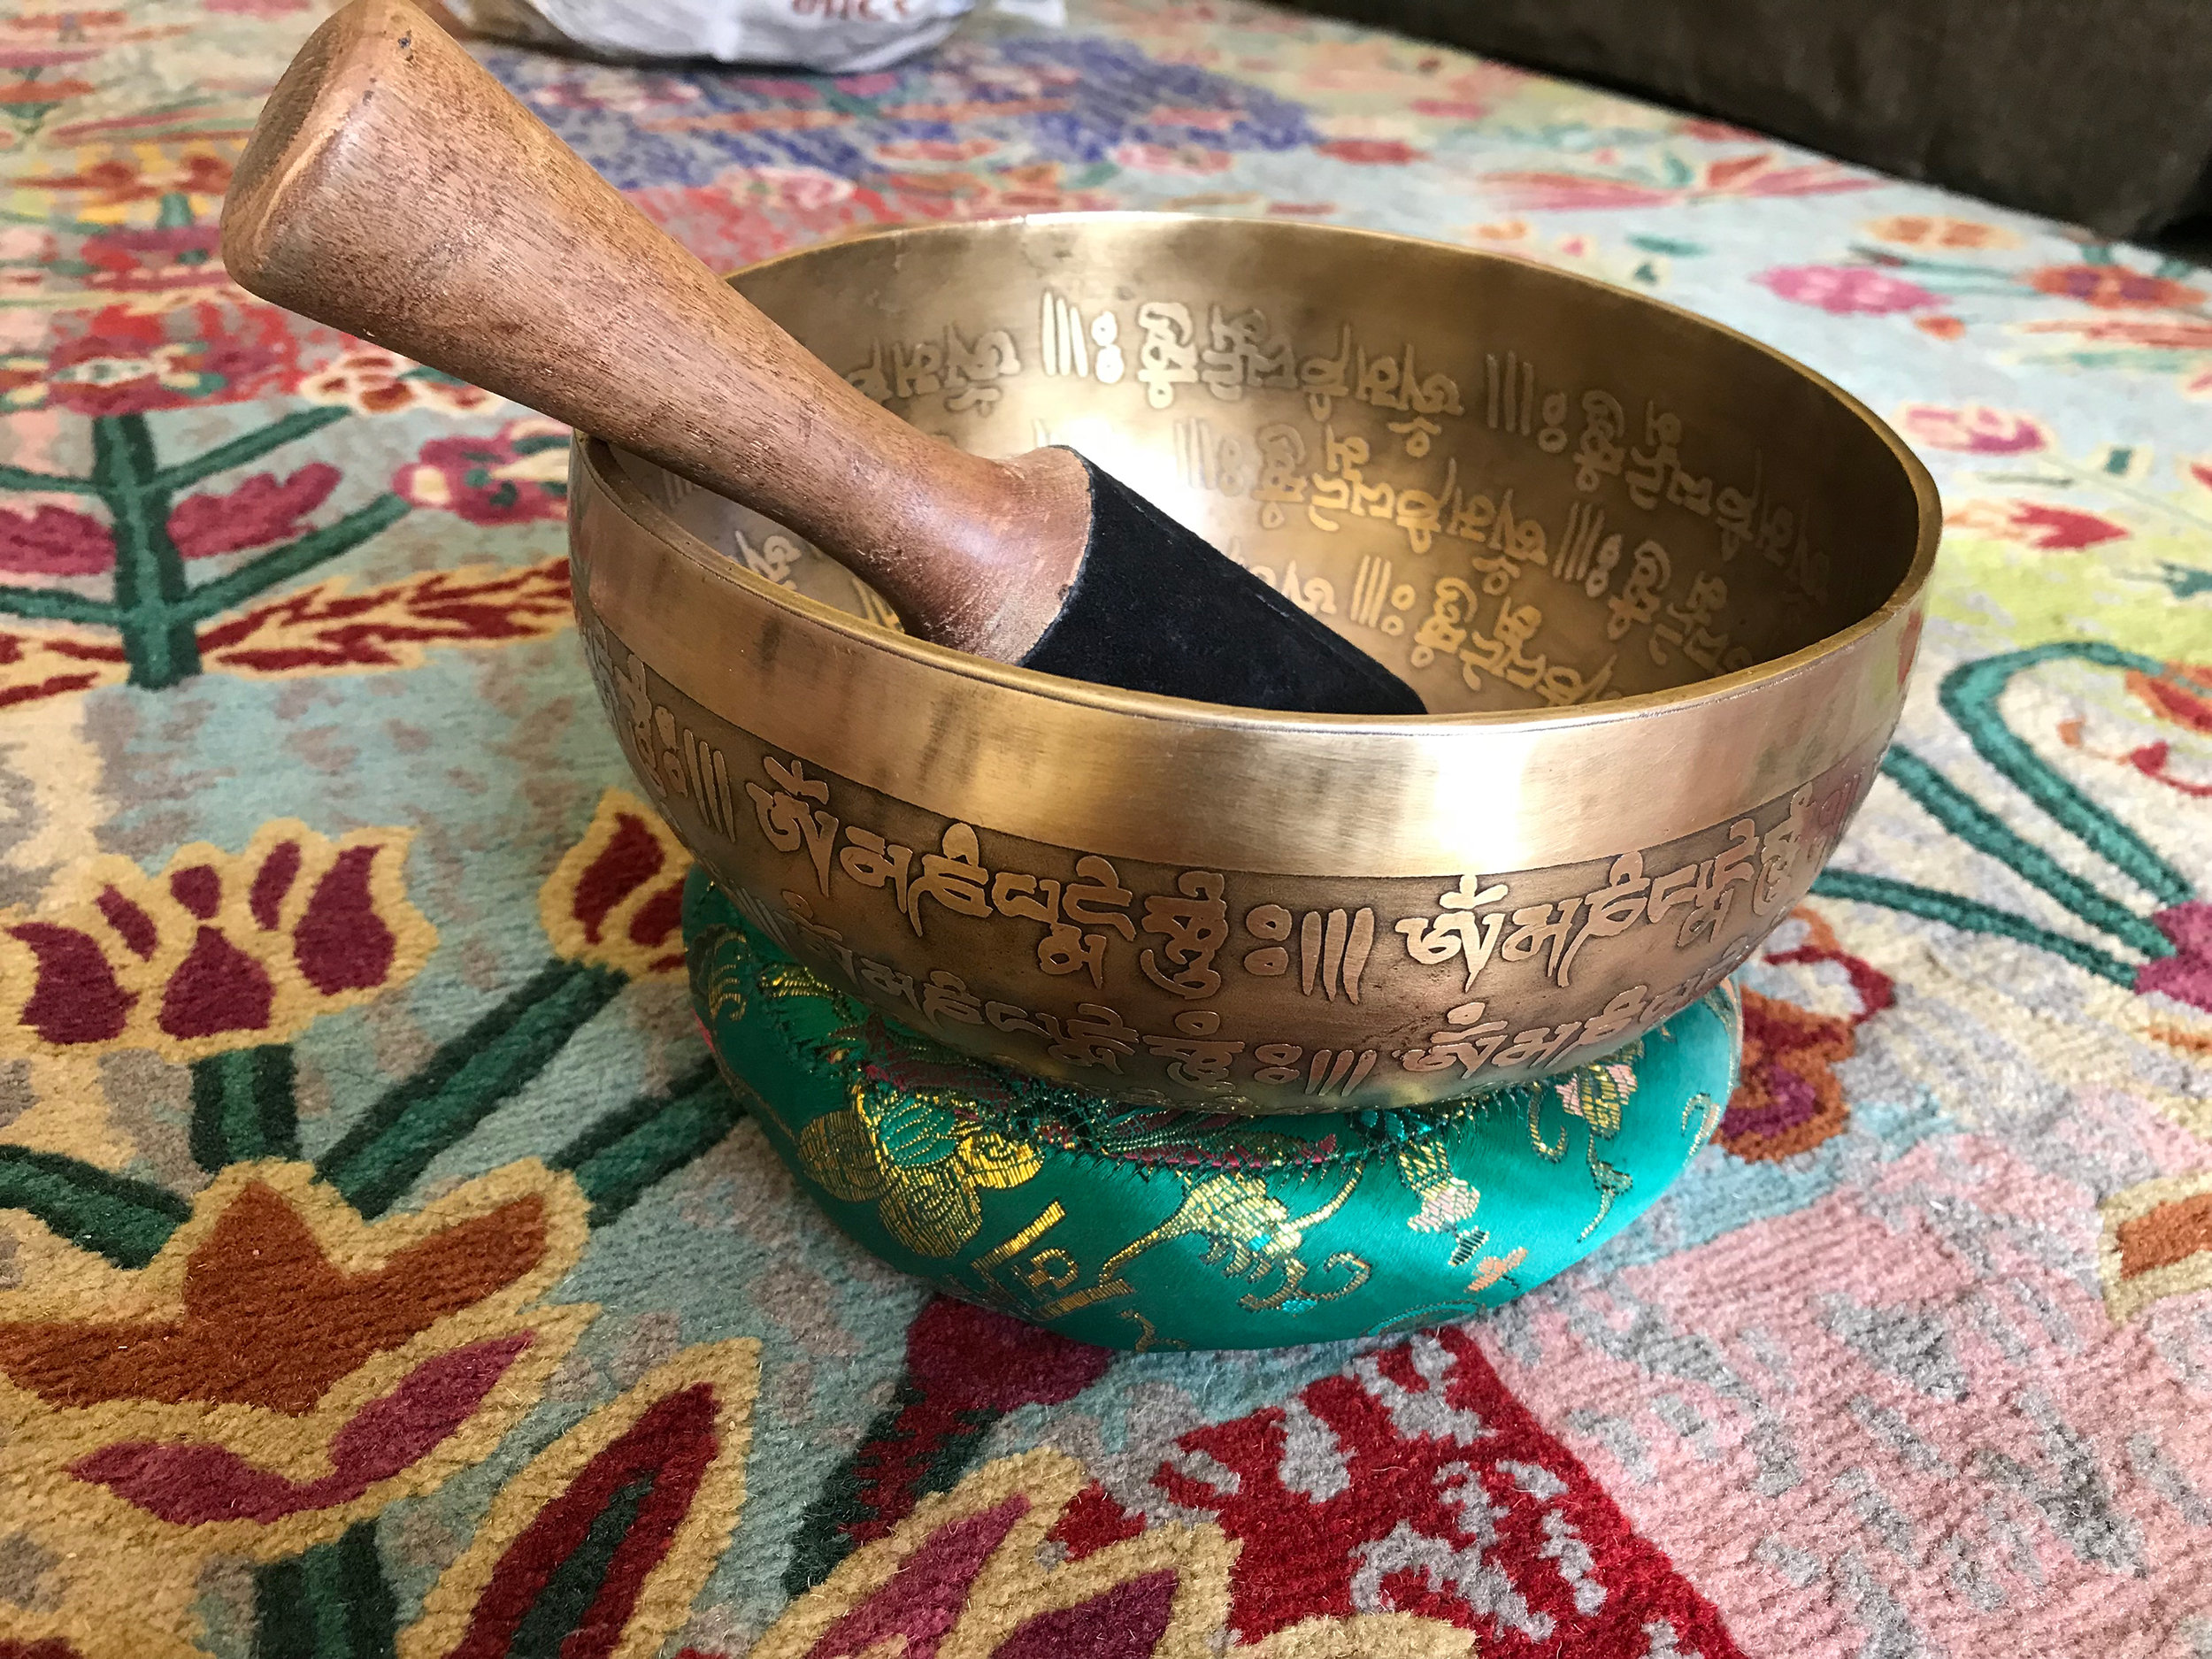 3 in 1 set of singing bowl handmade in Nepal Use for meditation and healing.